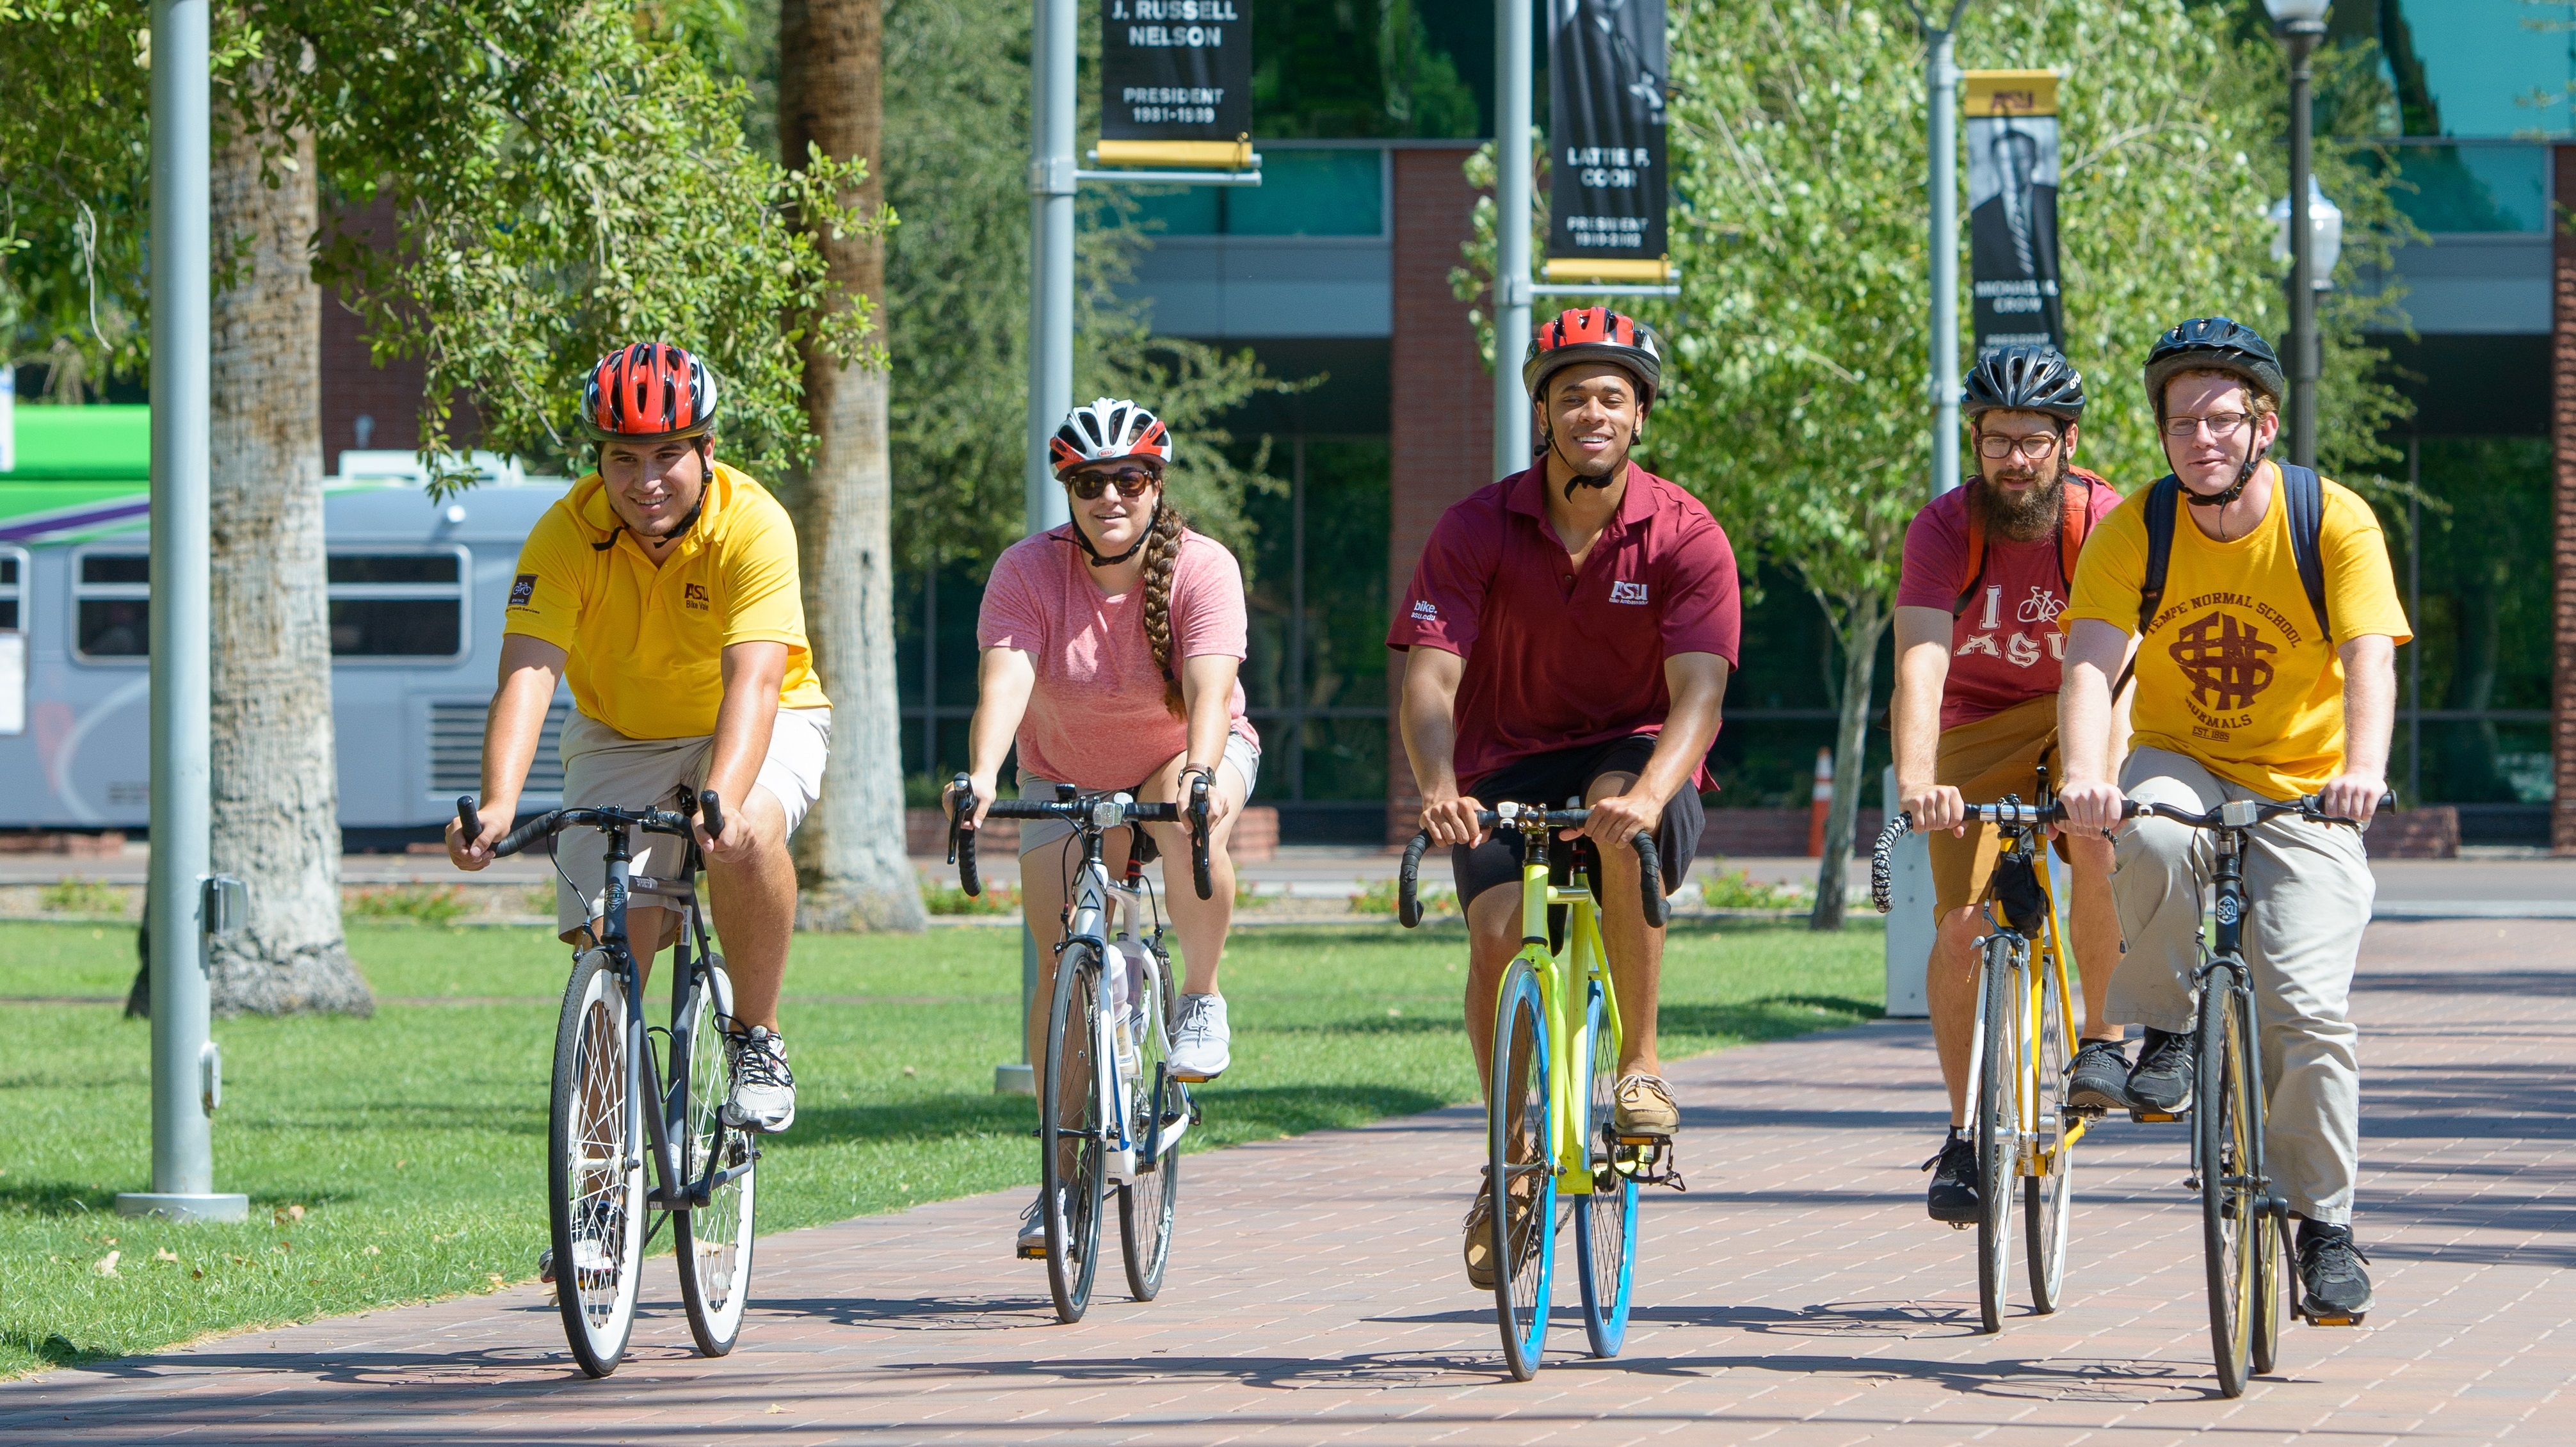 Cyclists ride their bicycles on ASU Tempe campus